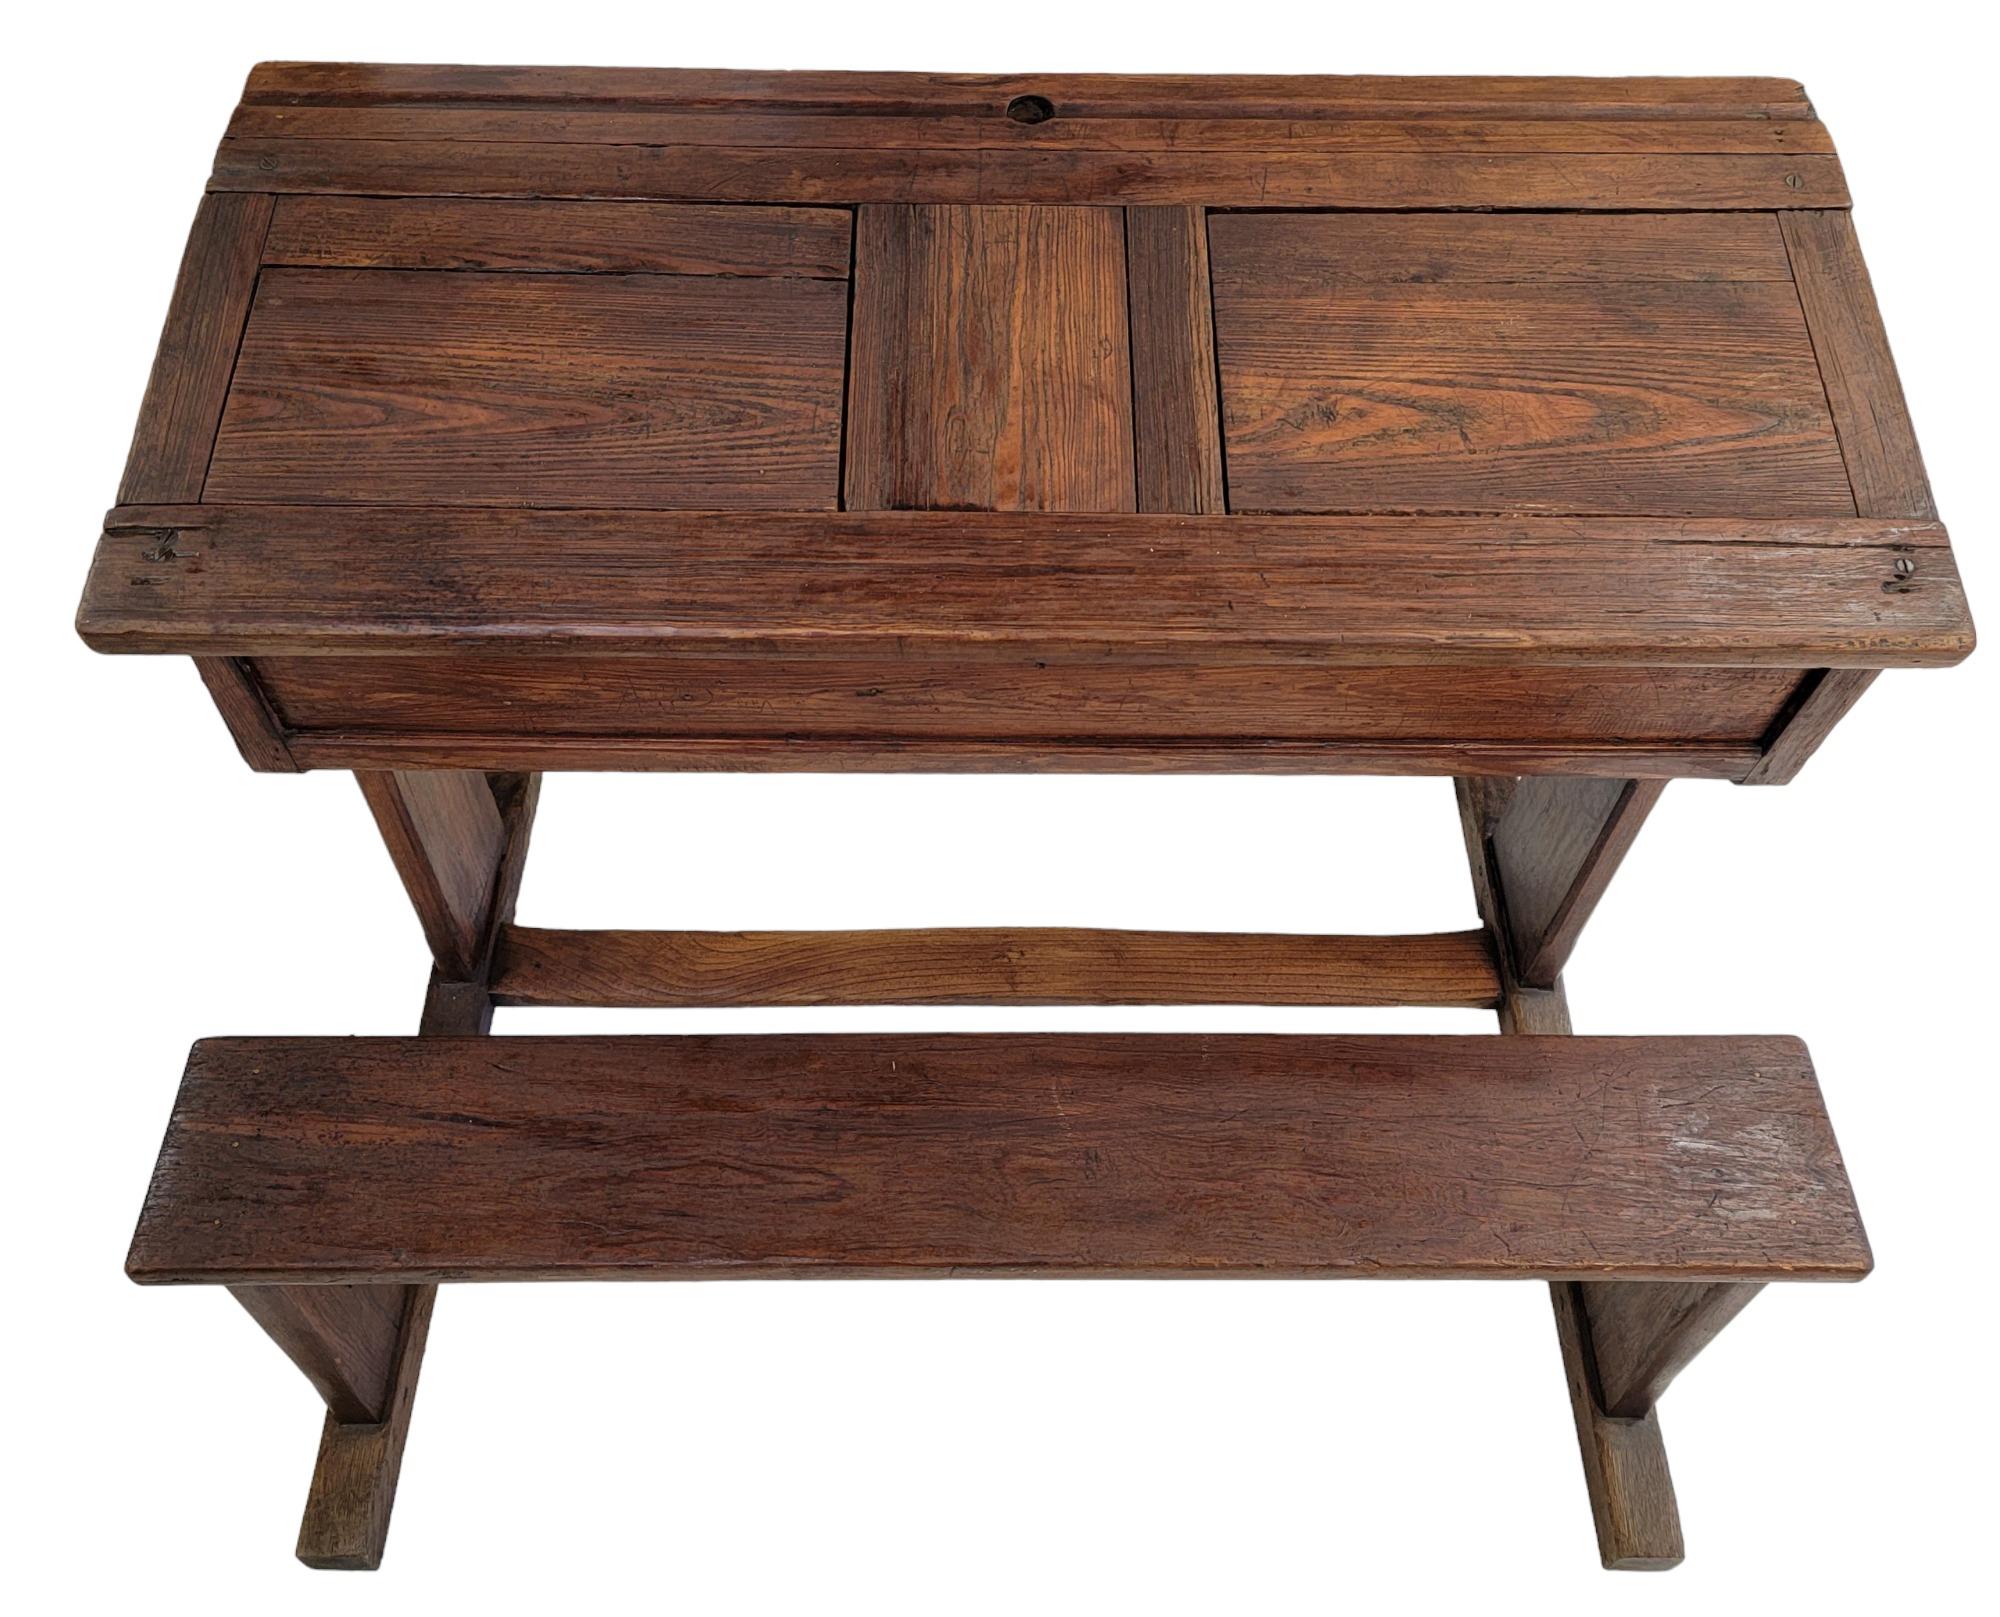 Rare 19thc French School Bench Desk For Two In Good Condition For Sale In Pasadena, CA